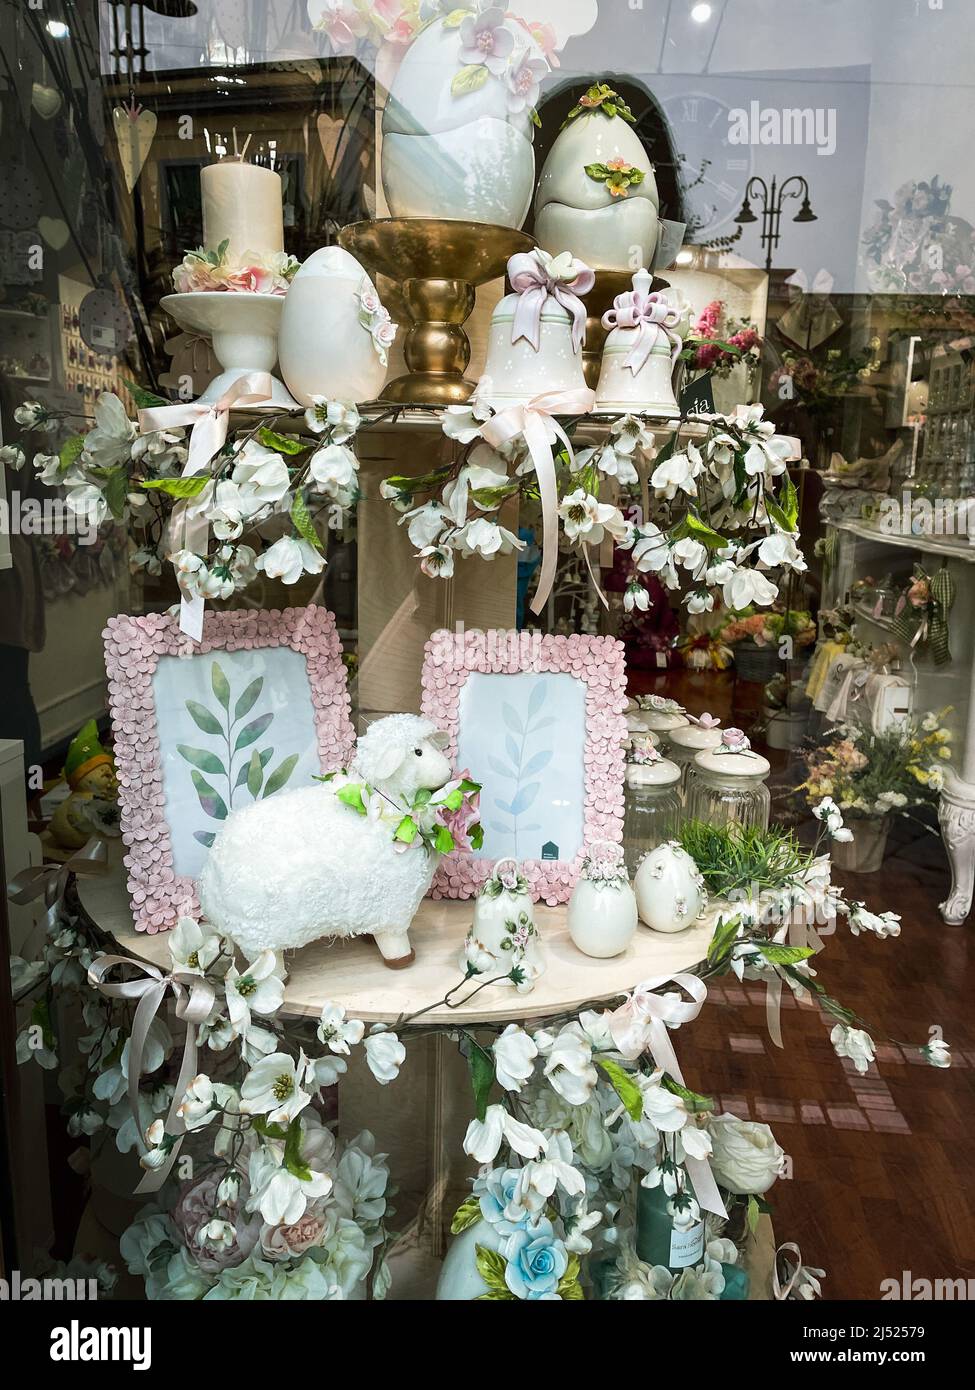 Artistic Easter arrangement, decor and souvenirs on glass showcase with white ceramic eggs, bells and flowers. Stock Photo